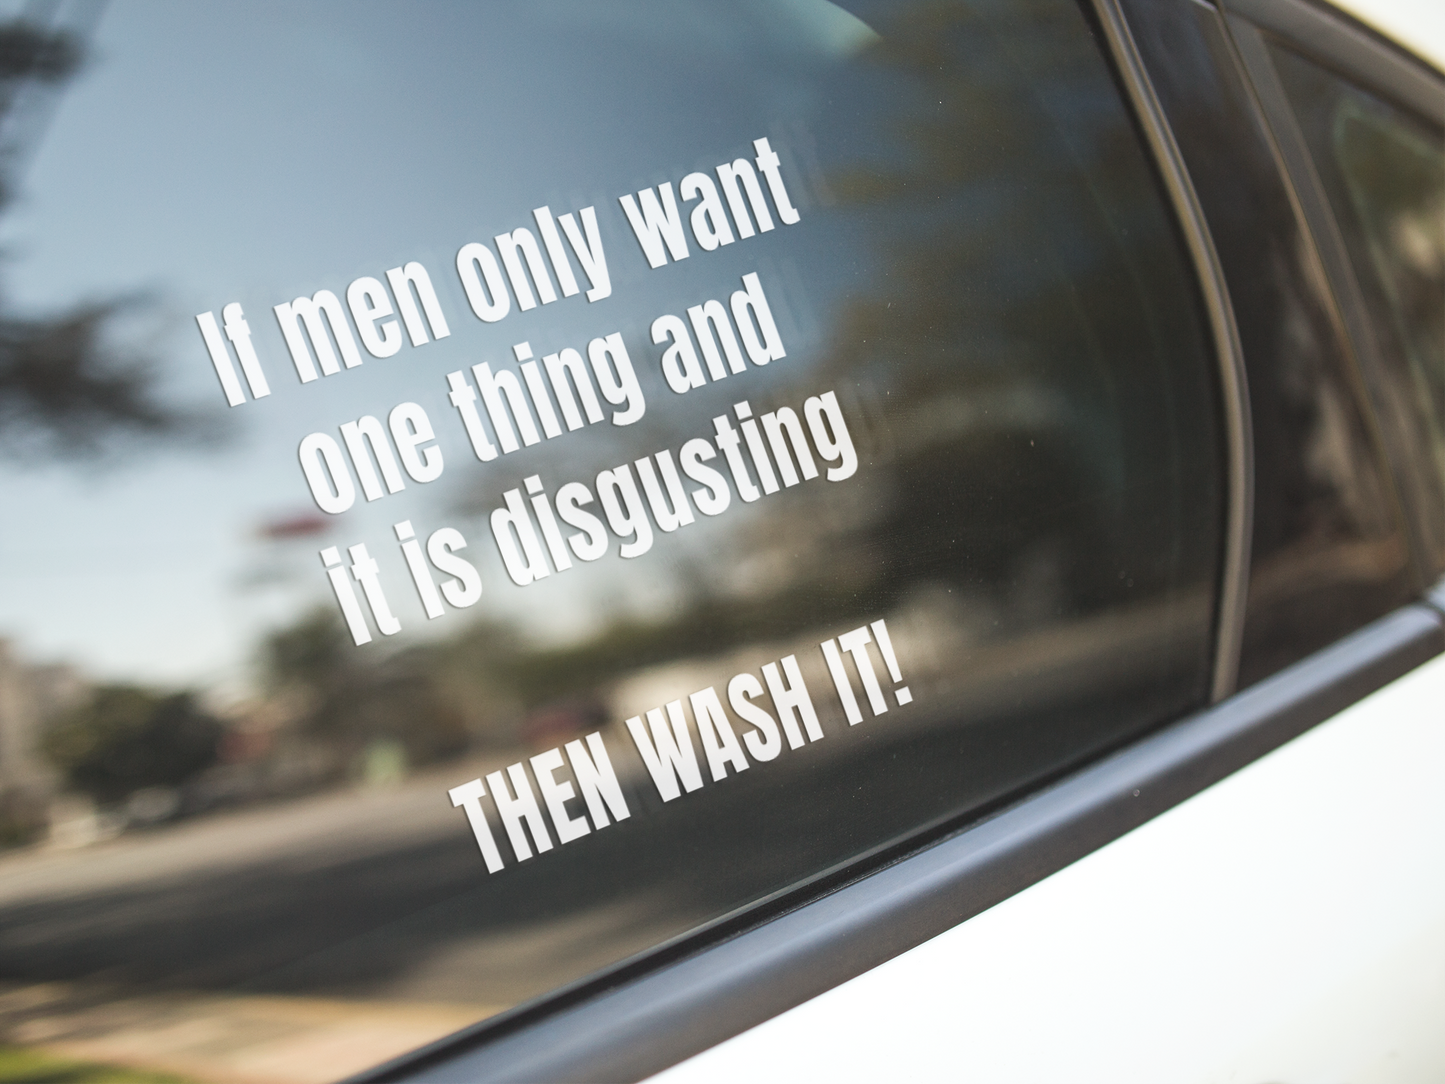 If men only want one thing and it's disgusting, then WASH IT - Vinyl decal bumper sticker car sticker computer sticker Die cut stickers funny sticker funny stickers LOL sticker sarcastic sticker sticker Sticker design Sticker Shop stickers vinyl sticker Vinyl stickers water proof sticker window sticker